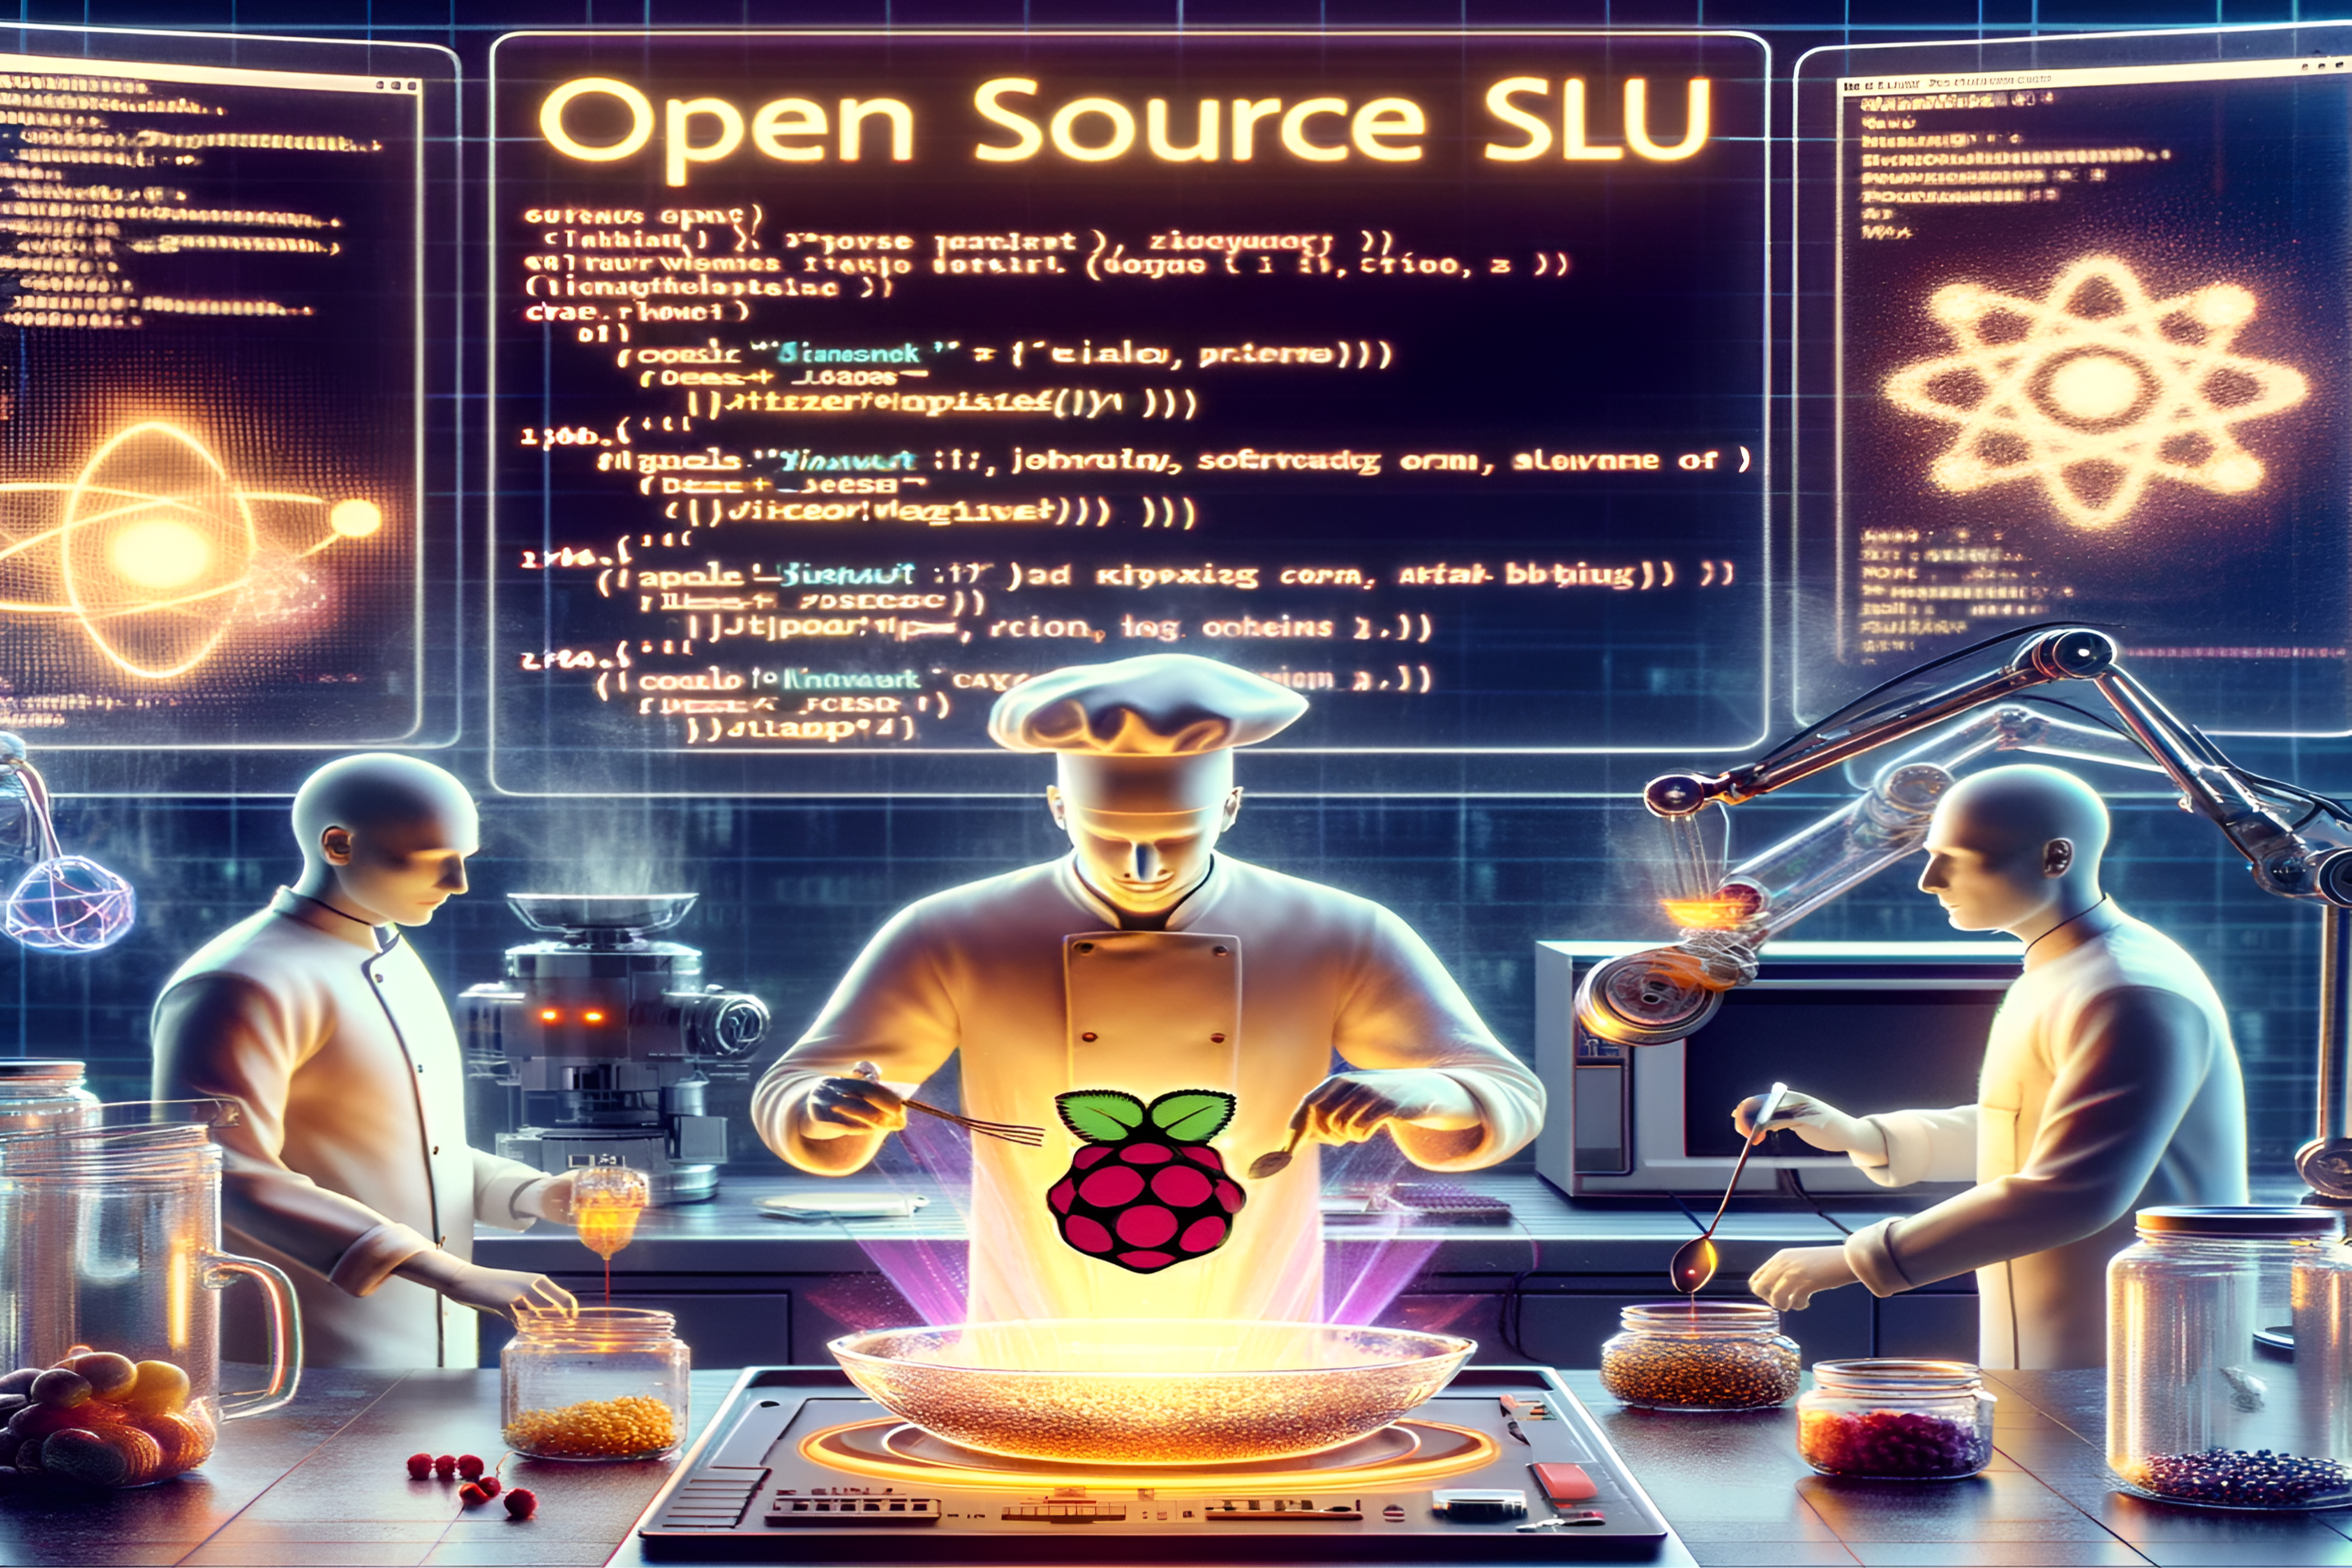 Baking at Open Source with SLU